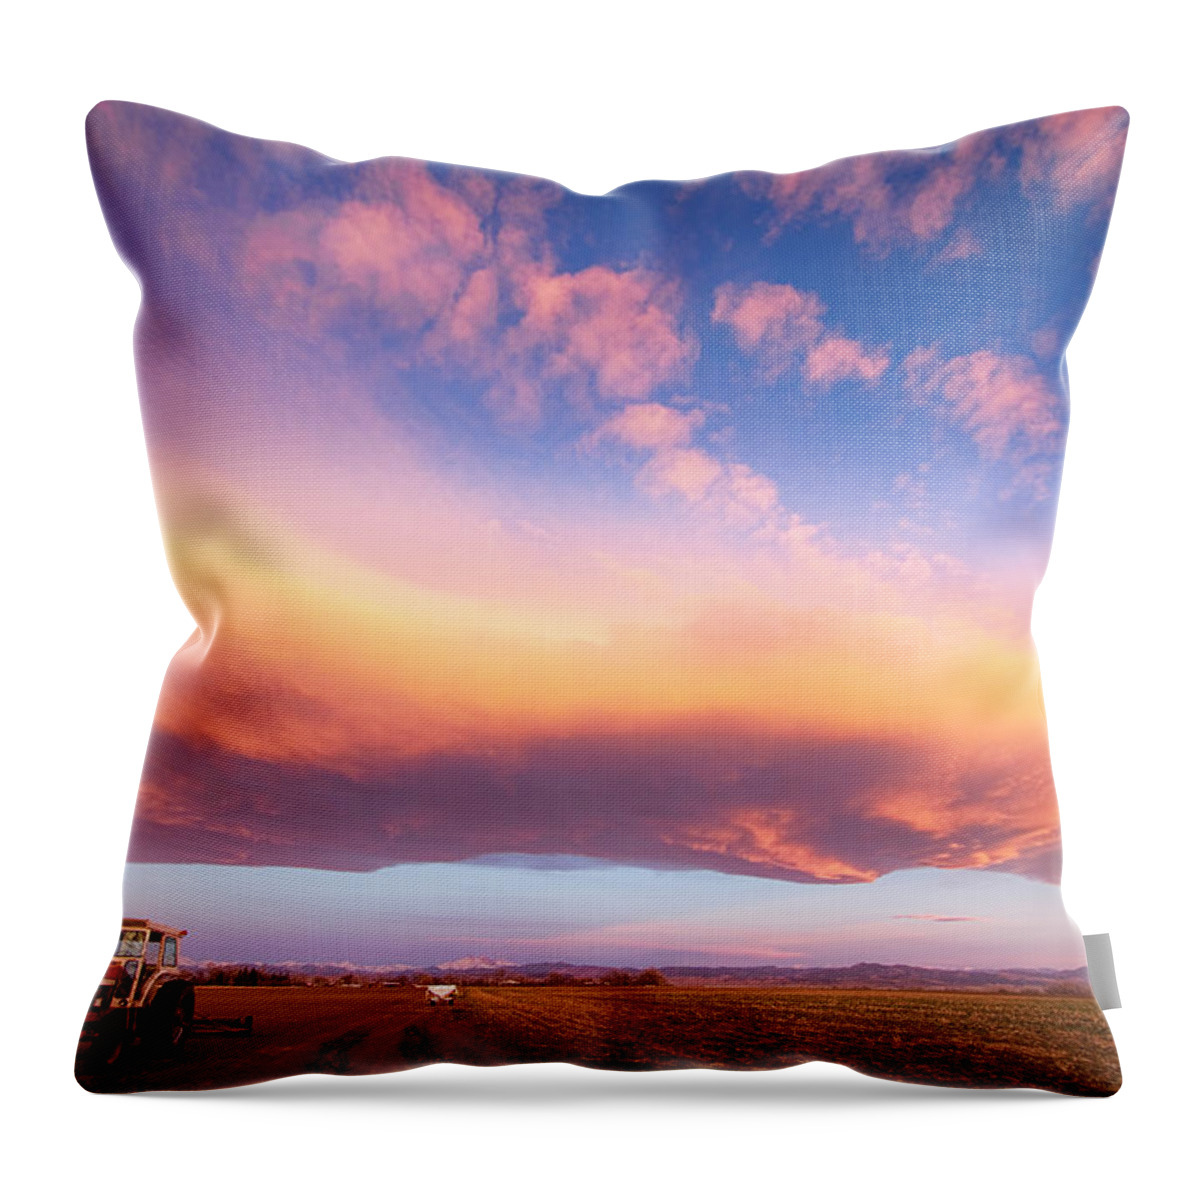 Colorful Throw Pillow featuring the photograph Early Morning Turbo Country Sky by James BO Insogna